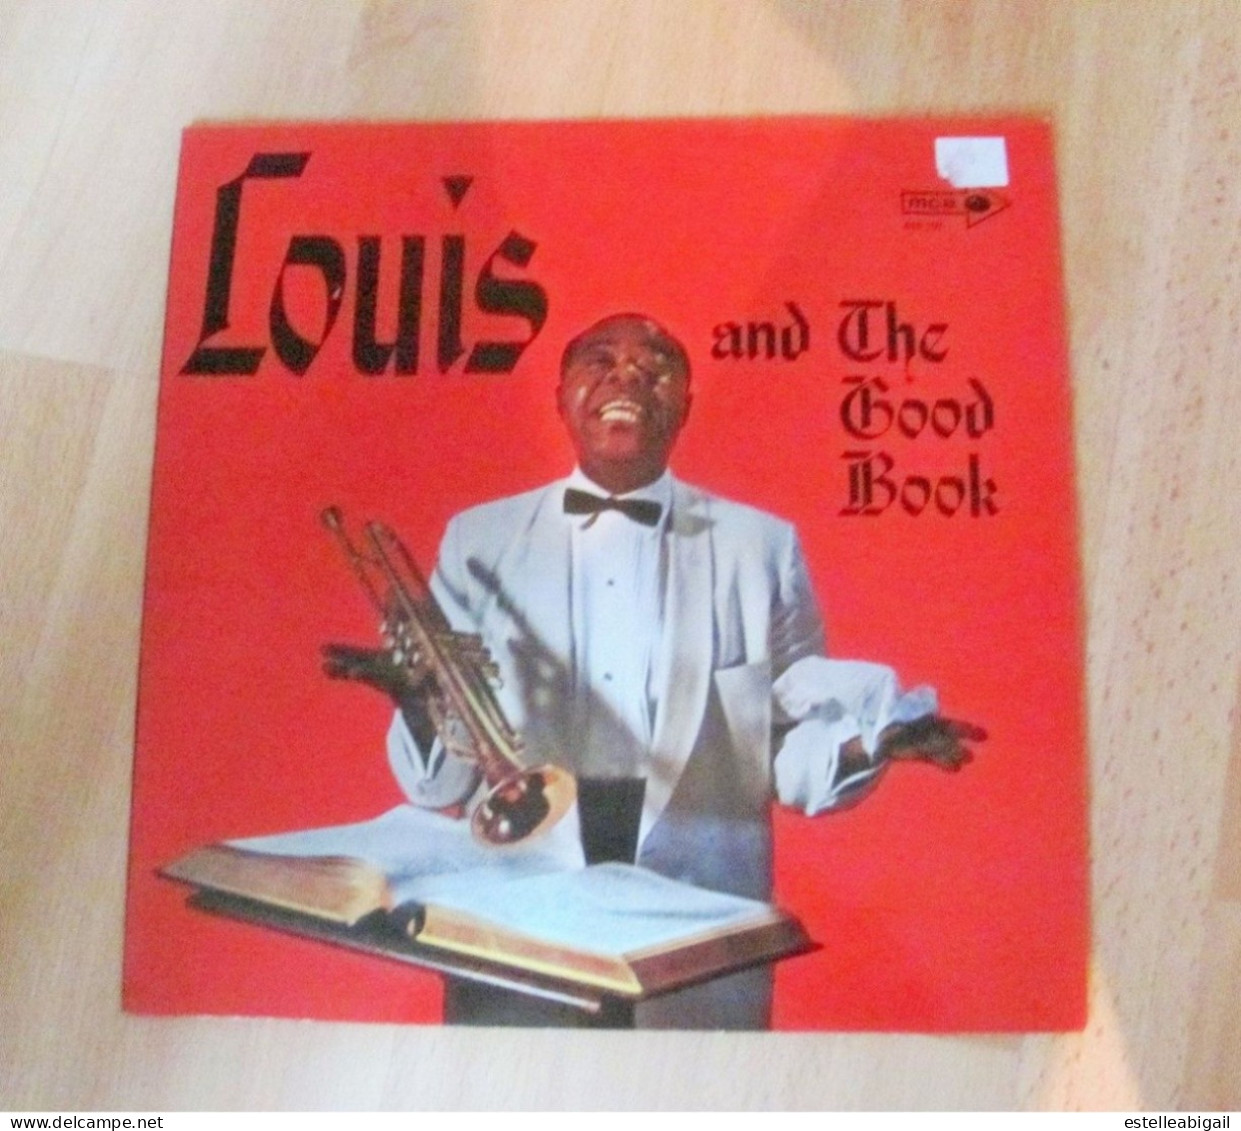 Louis And  The Good Book  33t - Jazz